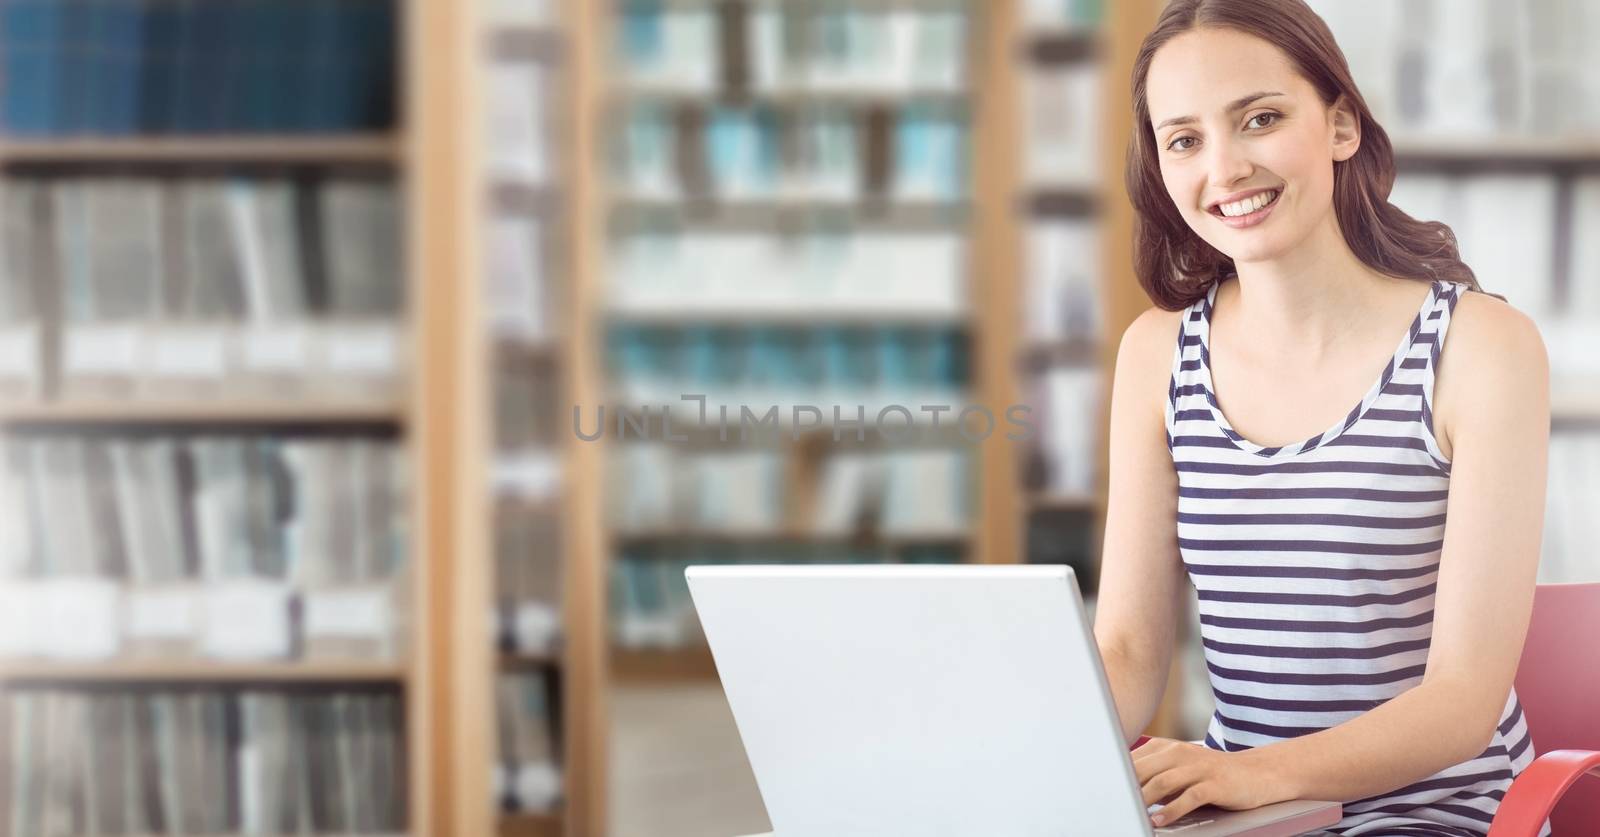 Student woman in education library by Wavebreakmedia